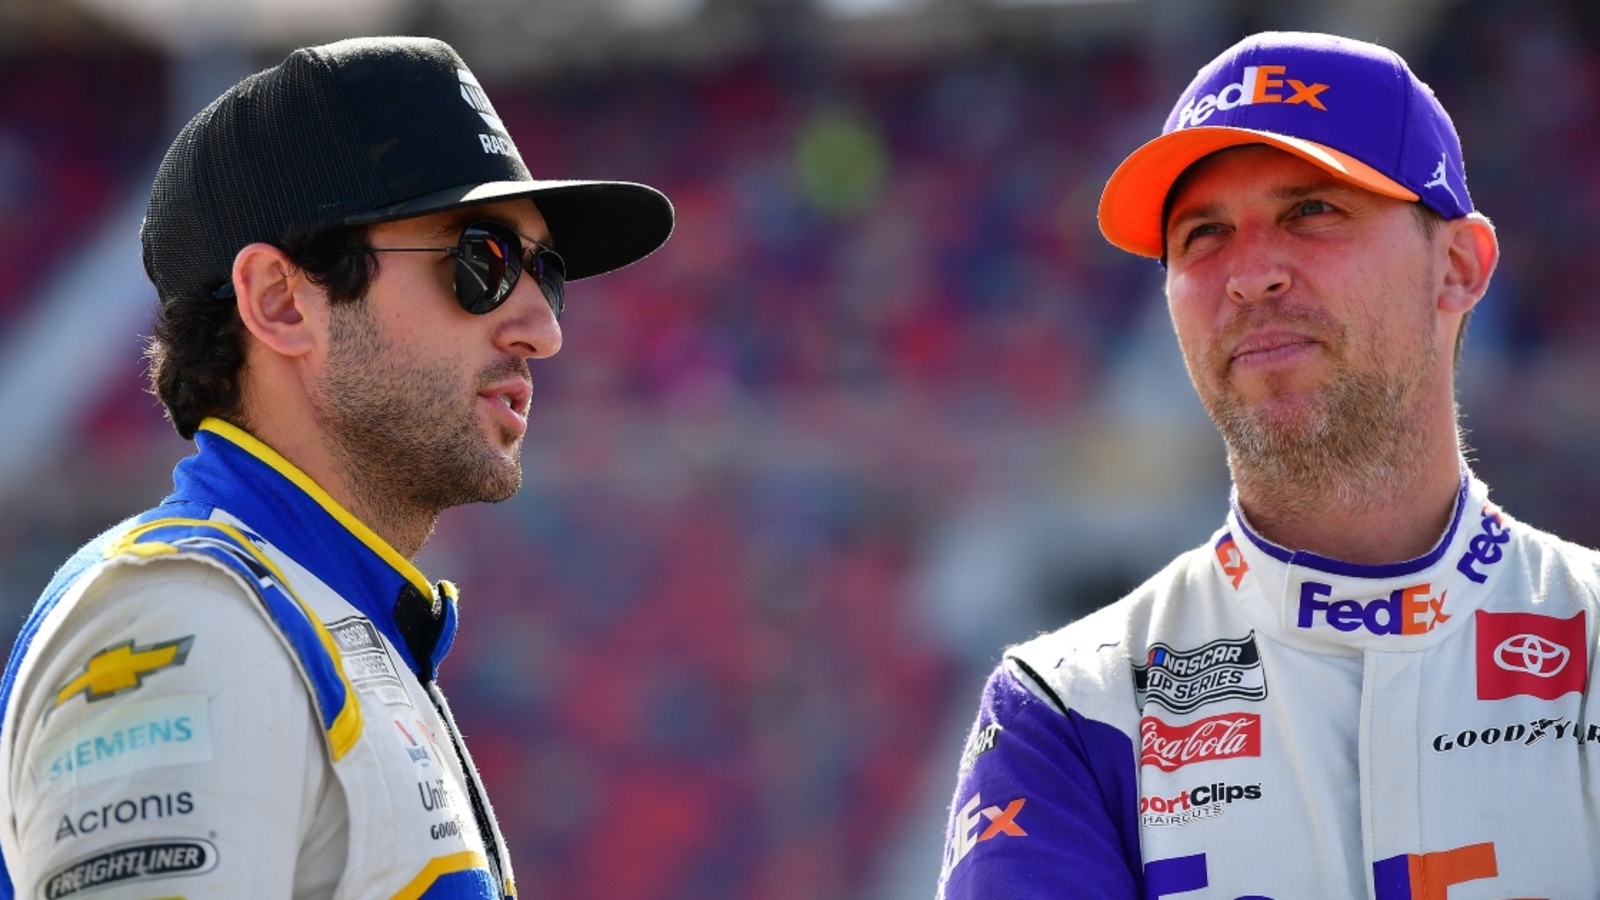 Denny Hamlin jumps off the Chase Elliott bandwagon, says he needs to win to get into playoffs